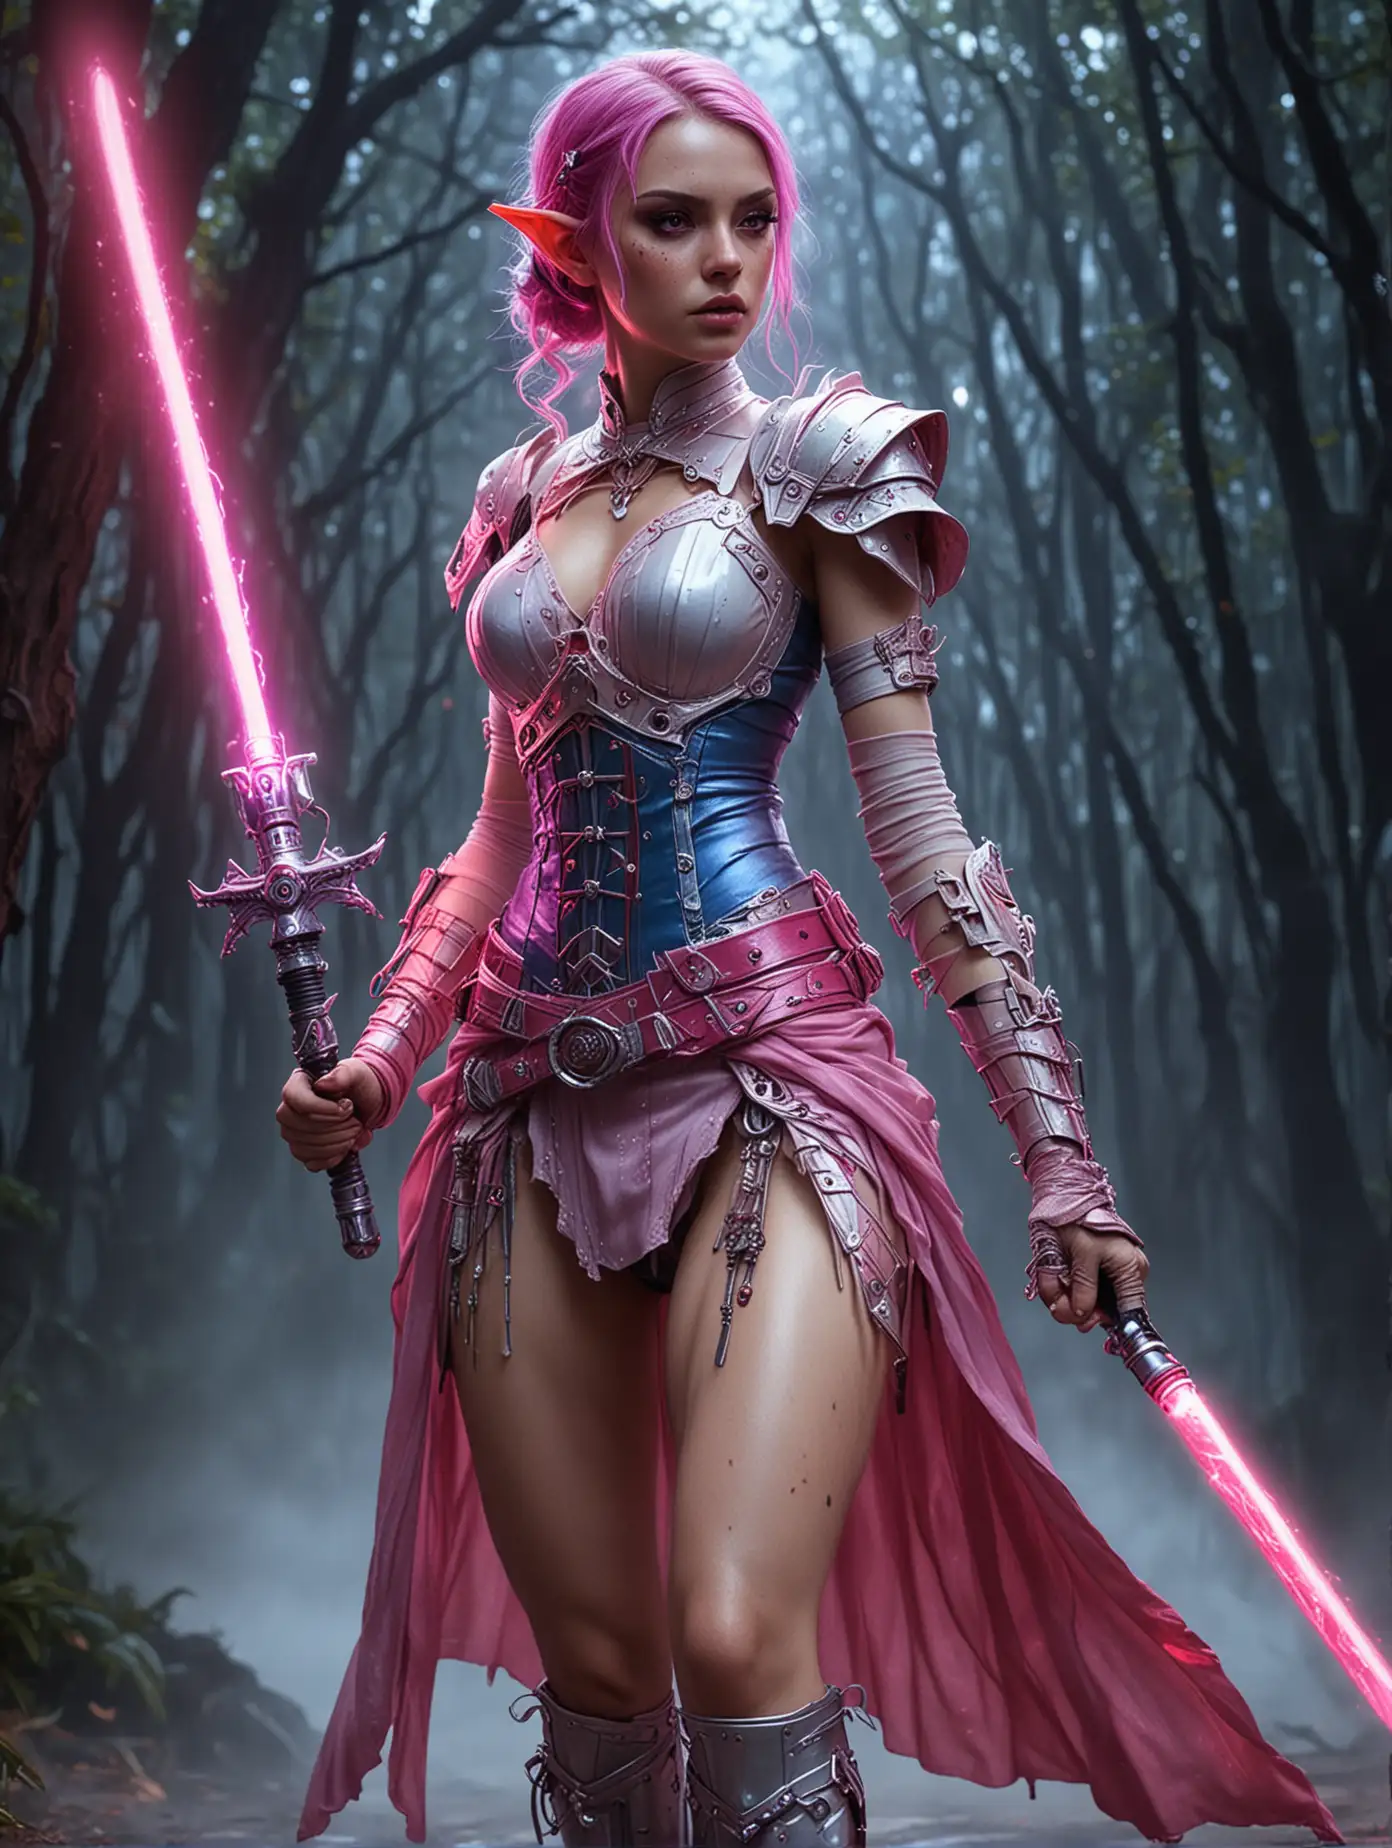 A sexy cyberpunk blue pale warrior woman elf wearing pink silken battle lace stands in a fierce battle pose, she weilds a hot pink lightsaber with a silverhilt, her skin highlighted in a purple moonlight,  her dark red hair and pale freckled skin show her Spanish heritage. Translucent,  silken, warrior of the dark forest 